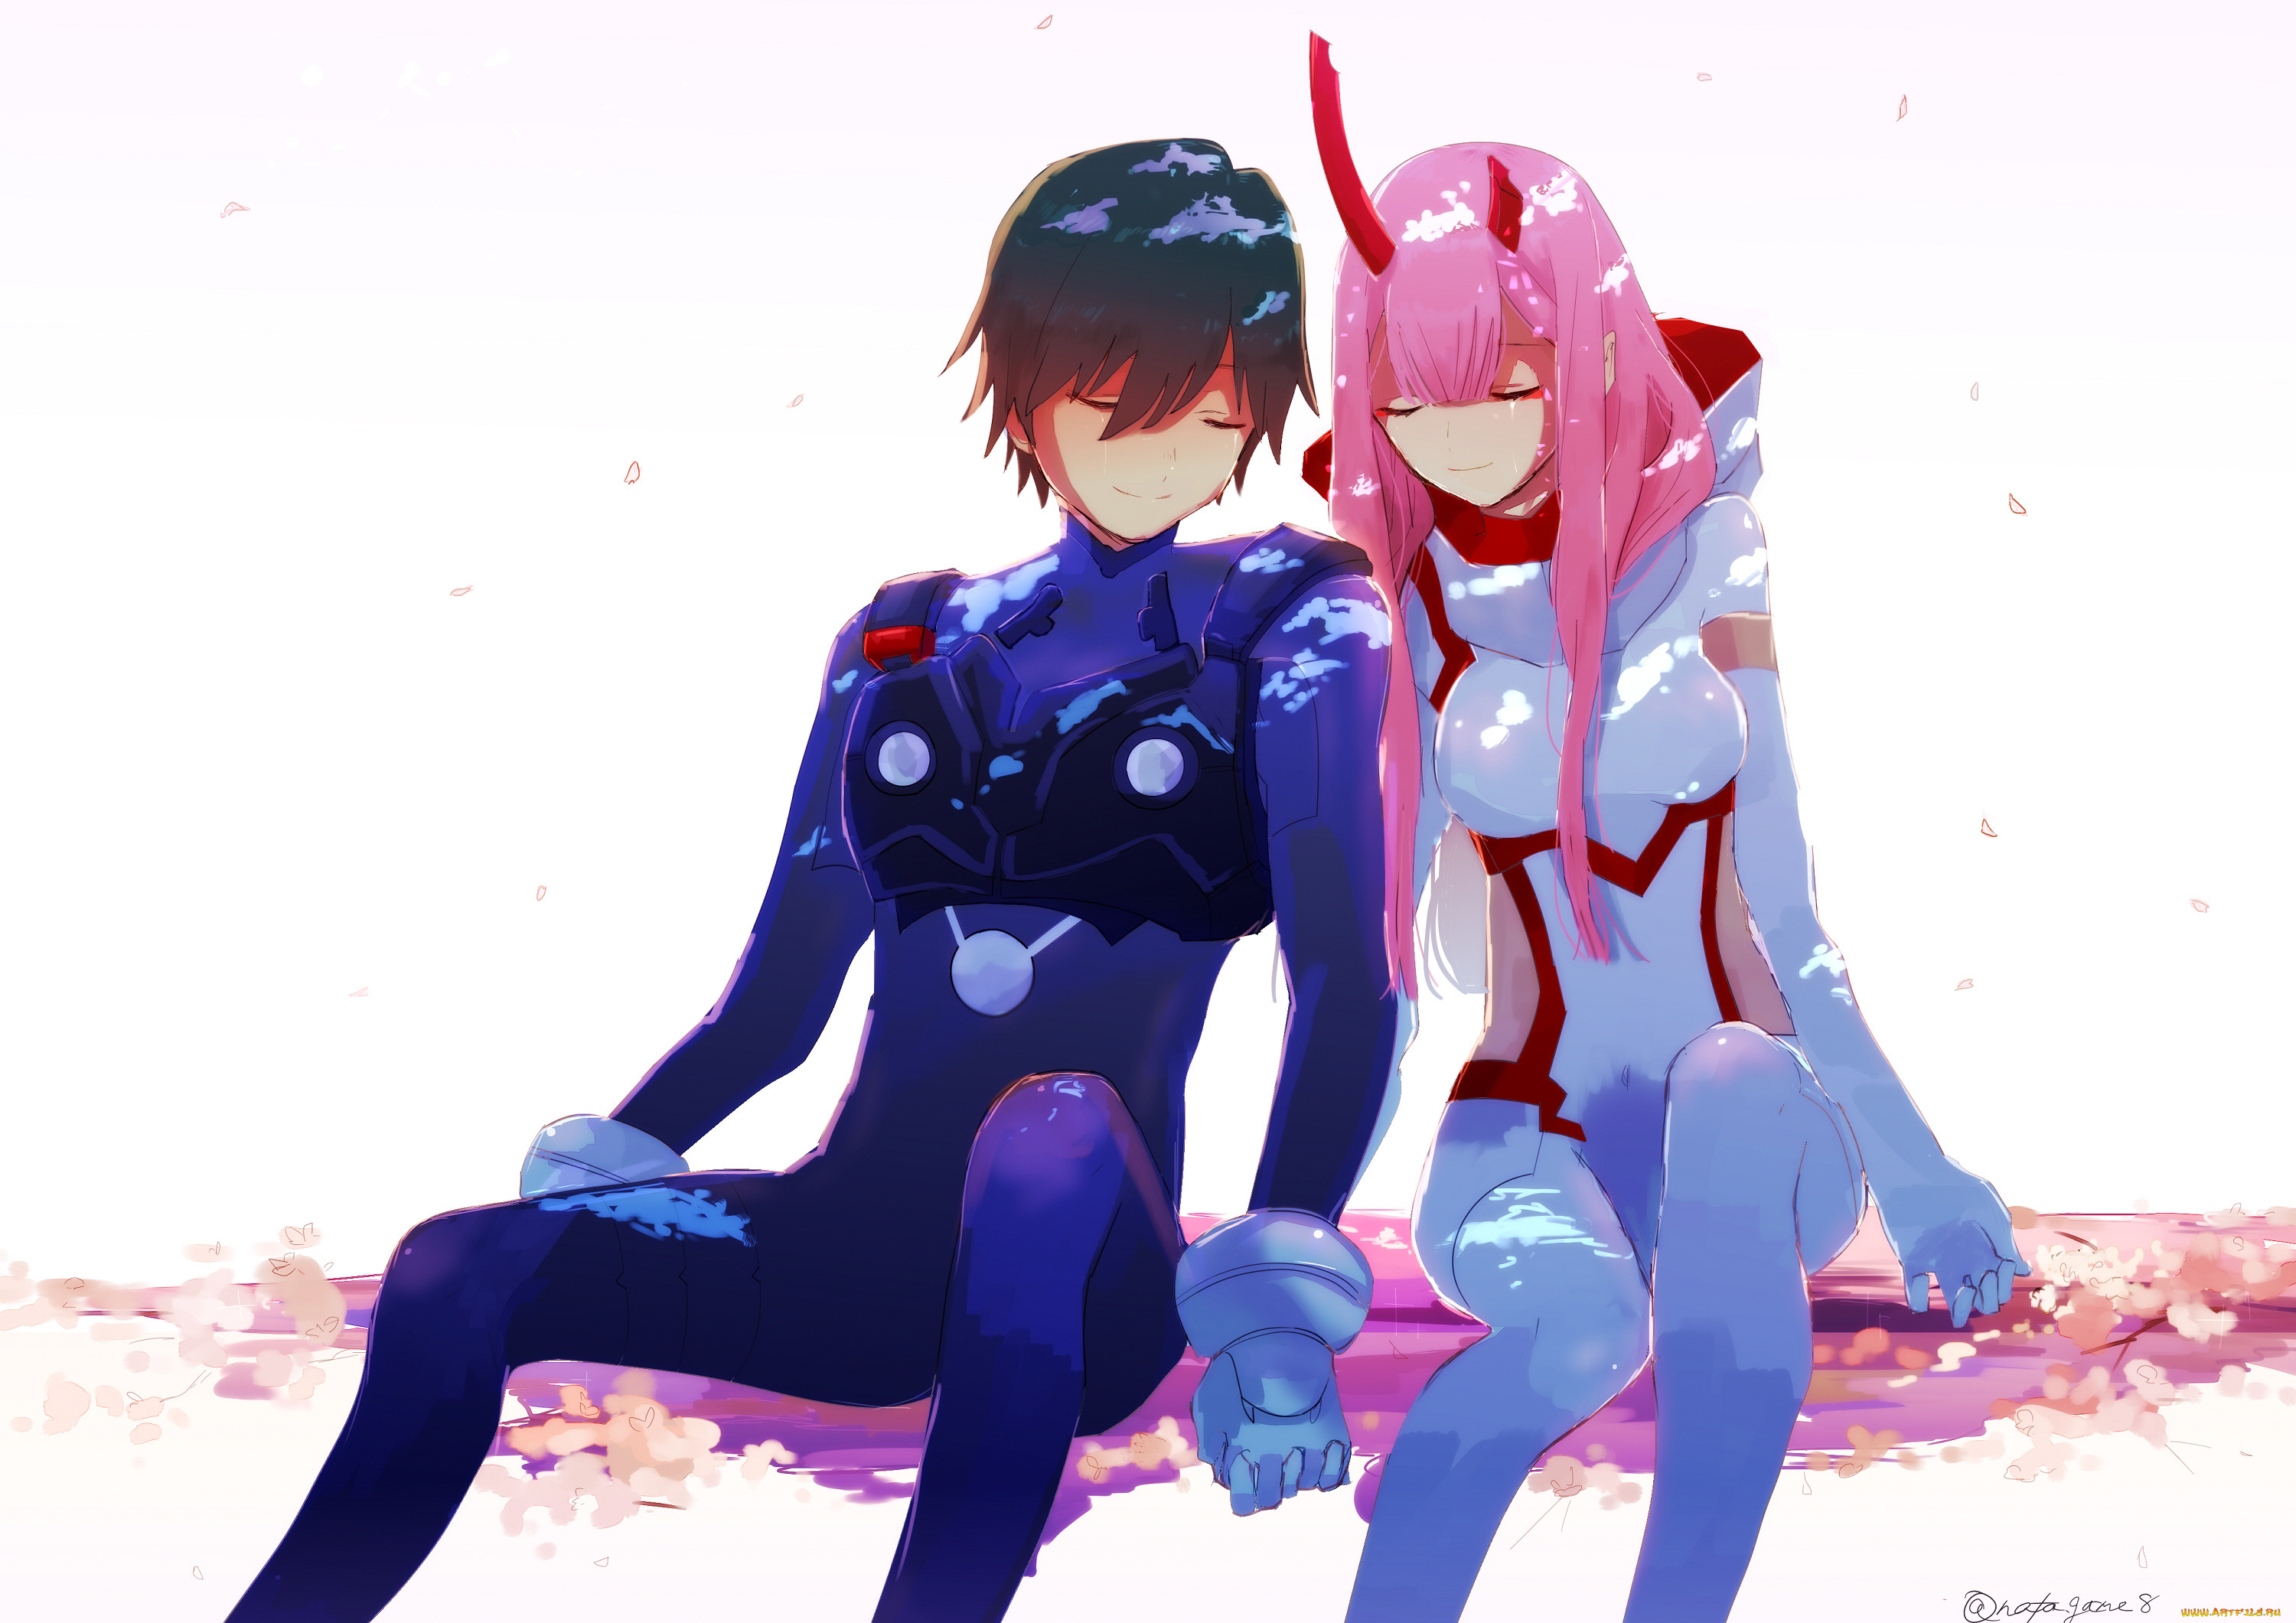 , darling in the frankxx, 